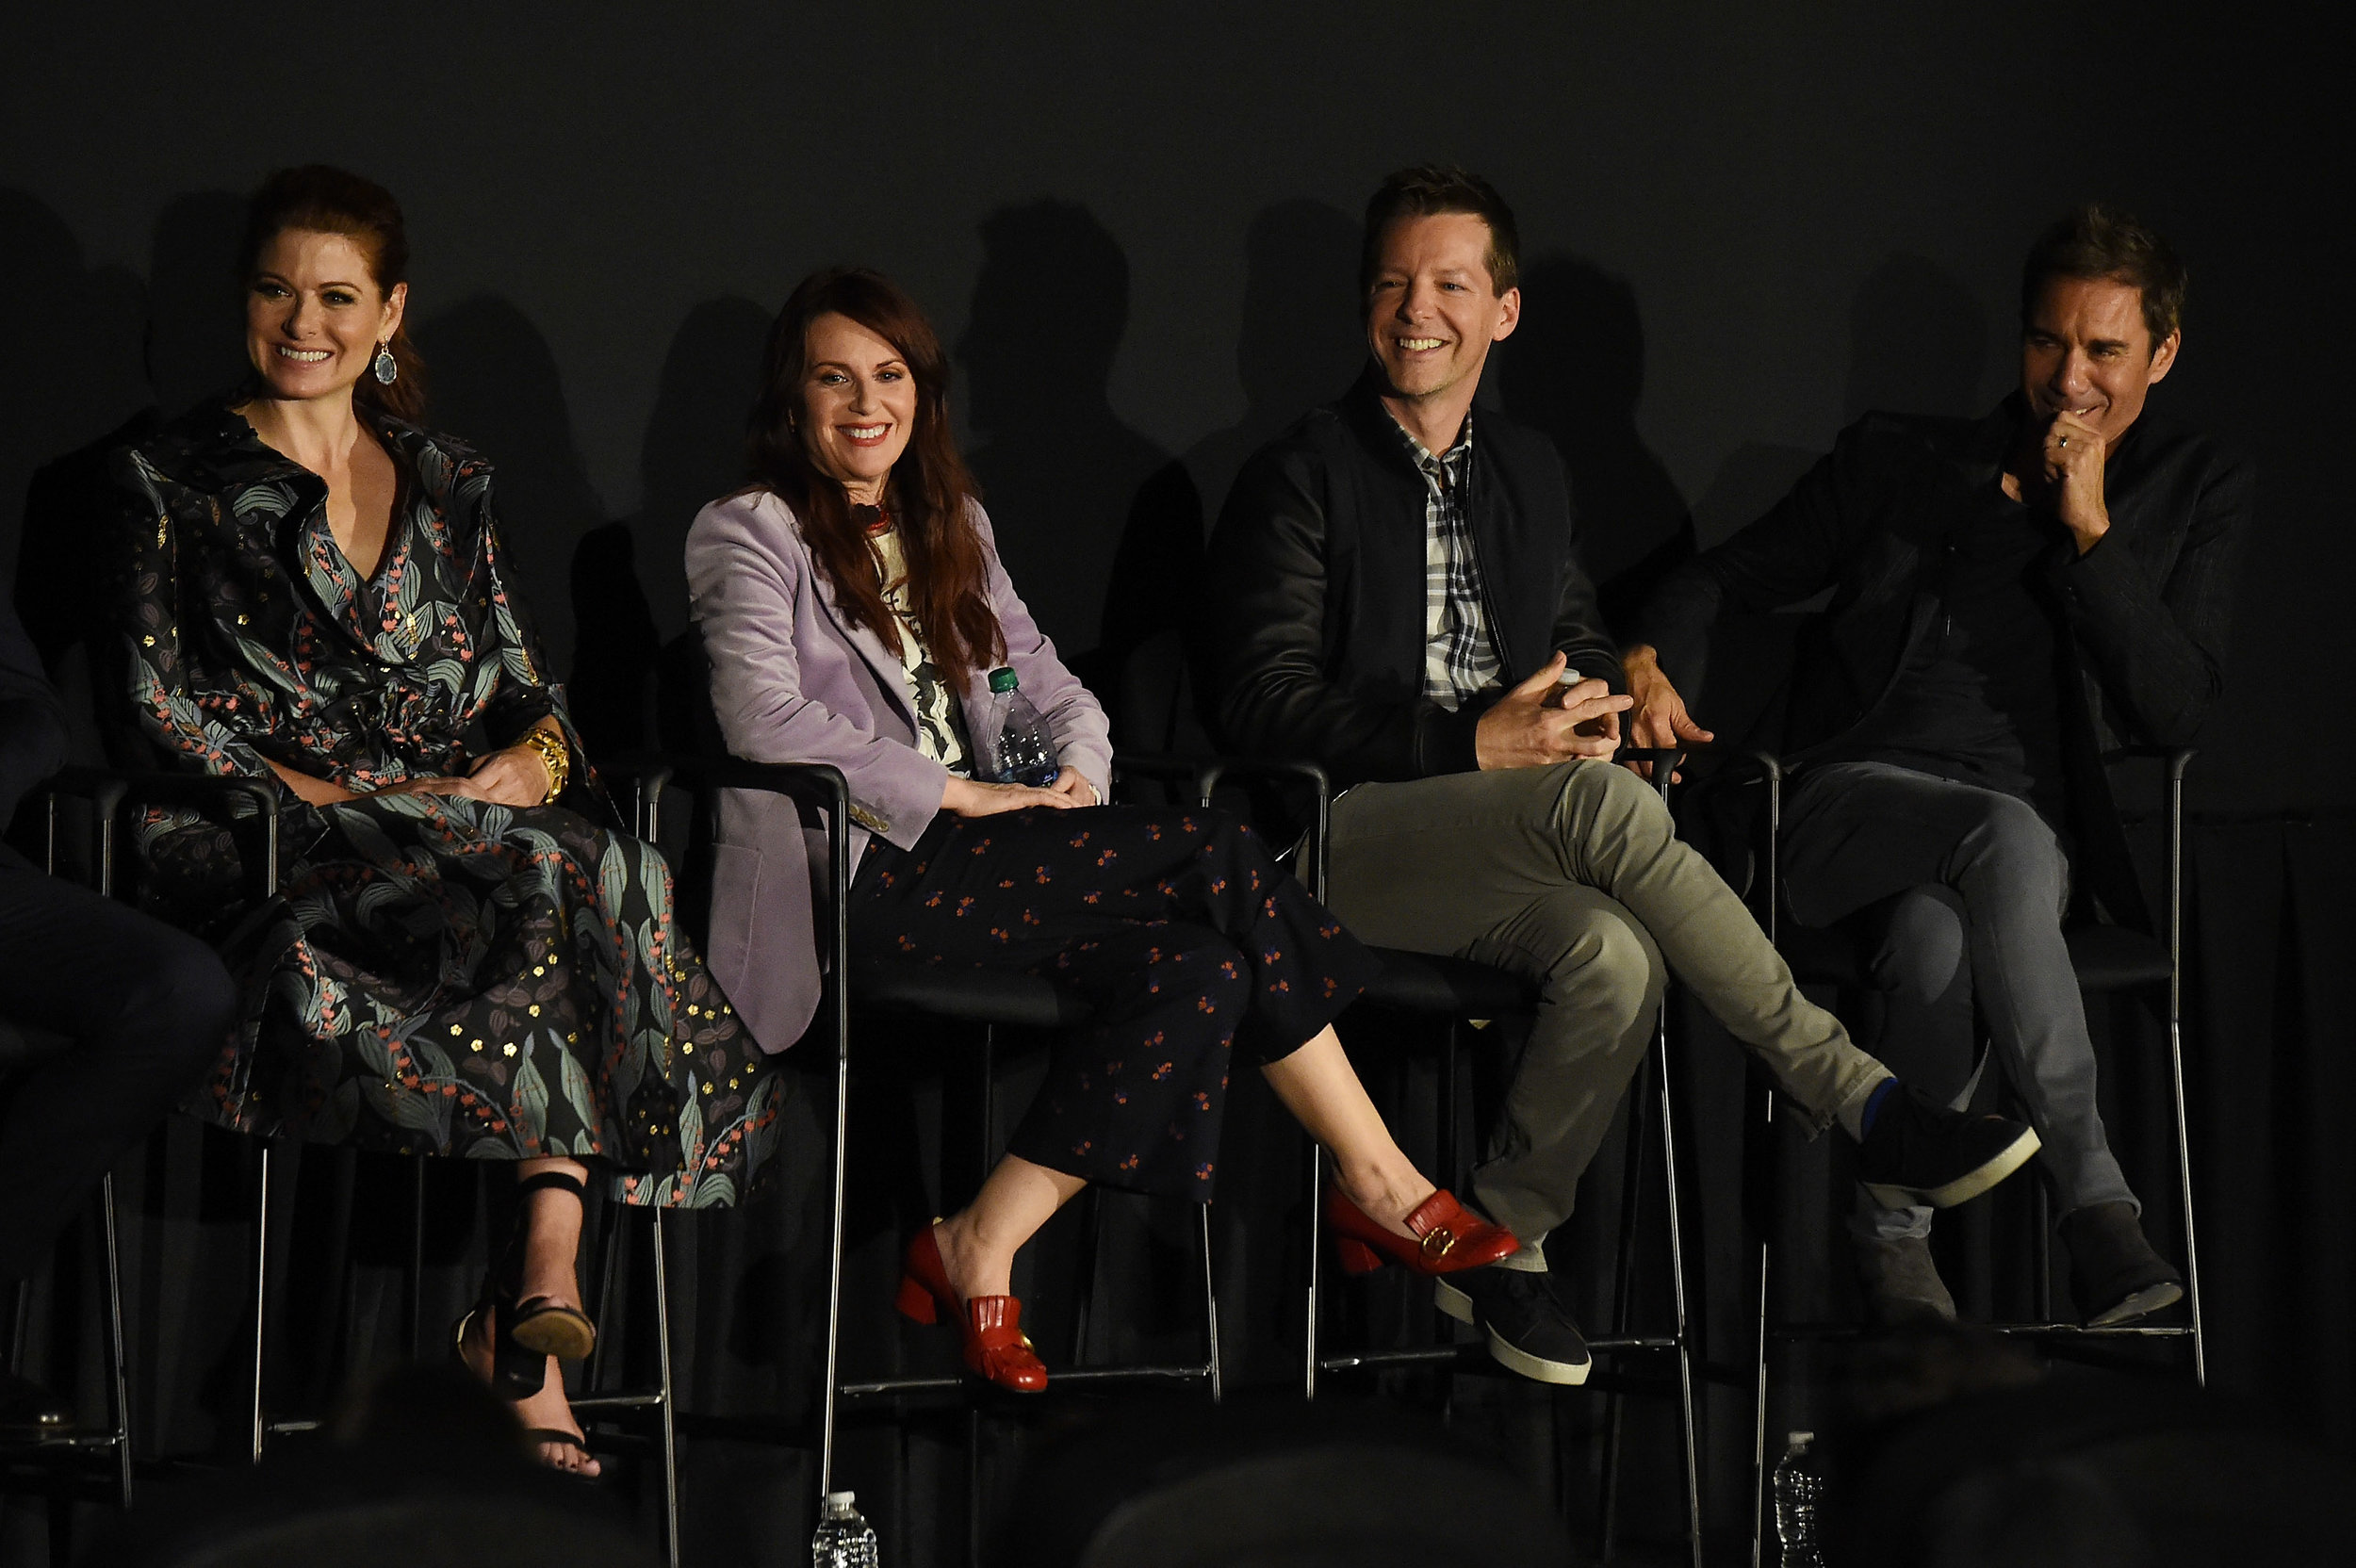 Debra Messing, Megan Mullally, Sean Hayes and Eric McCormack attend the Tribeca TV Festival exclusive celebration for Will & Grace at Cinepolis Chelsea on September 23, 2017 in New York City. (Photo by Nicholas H.jpg